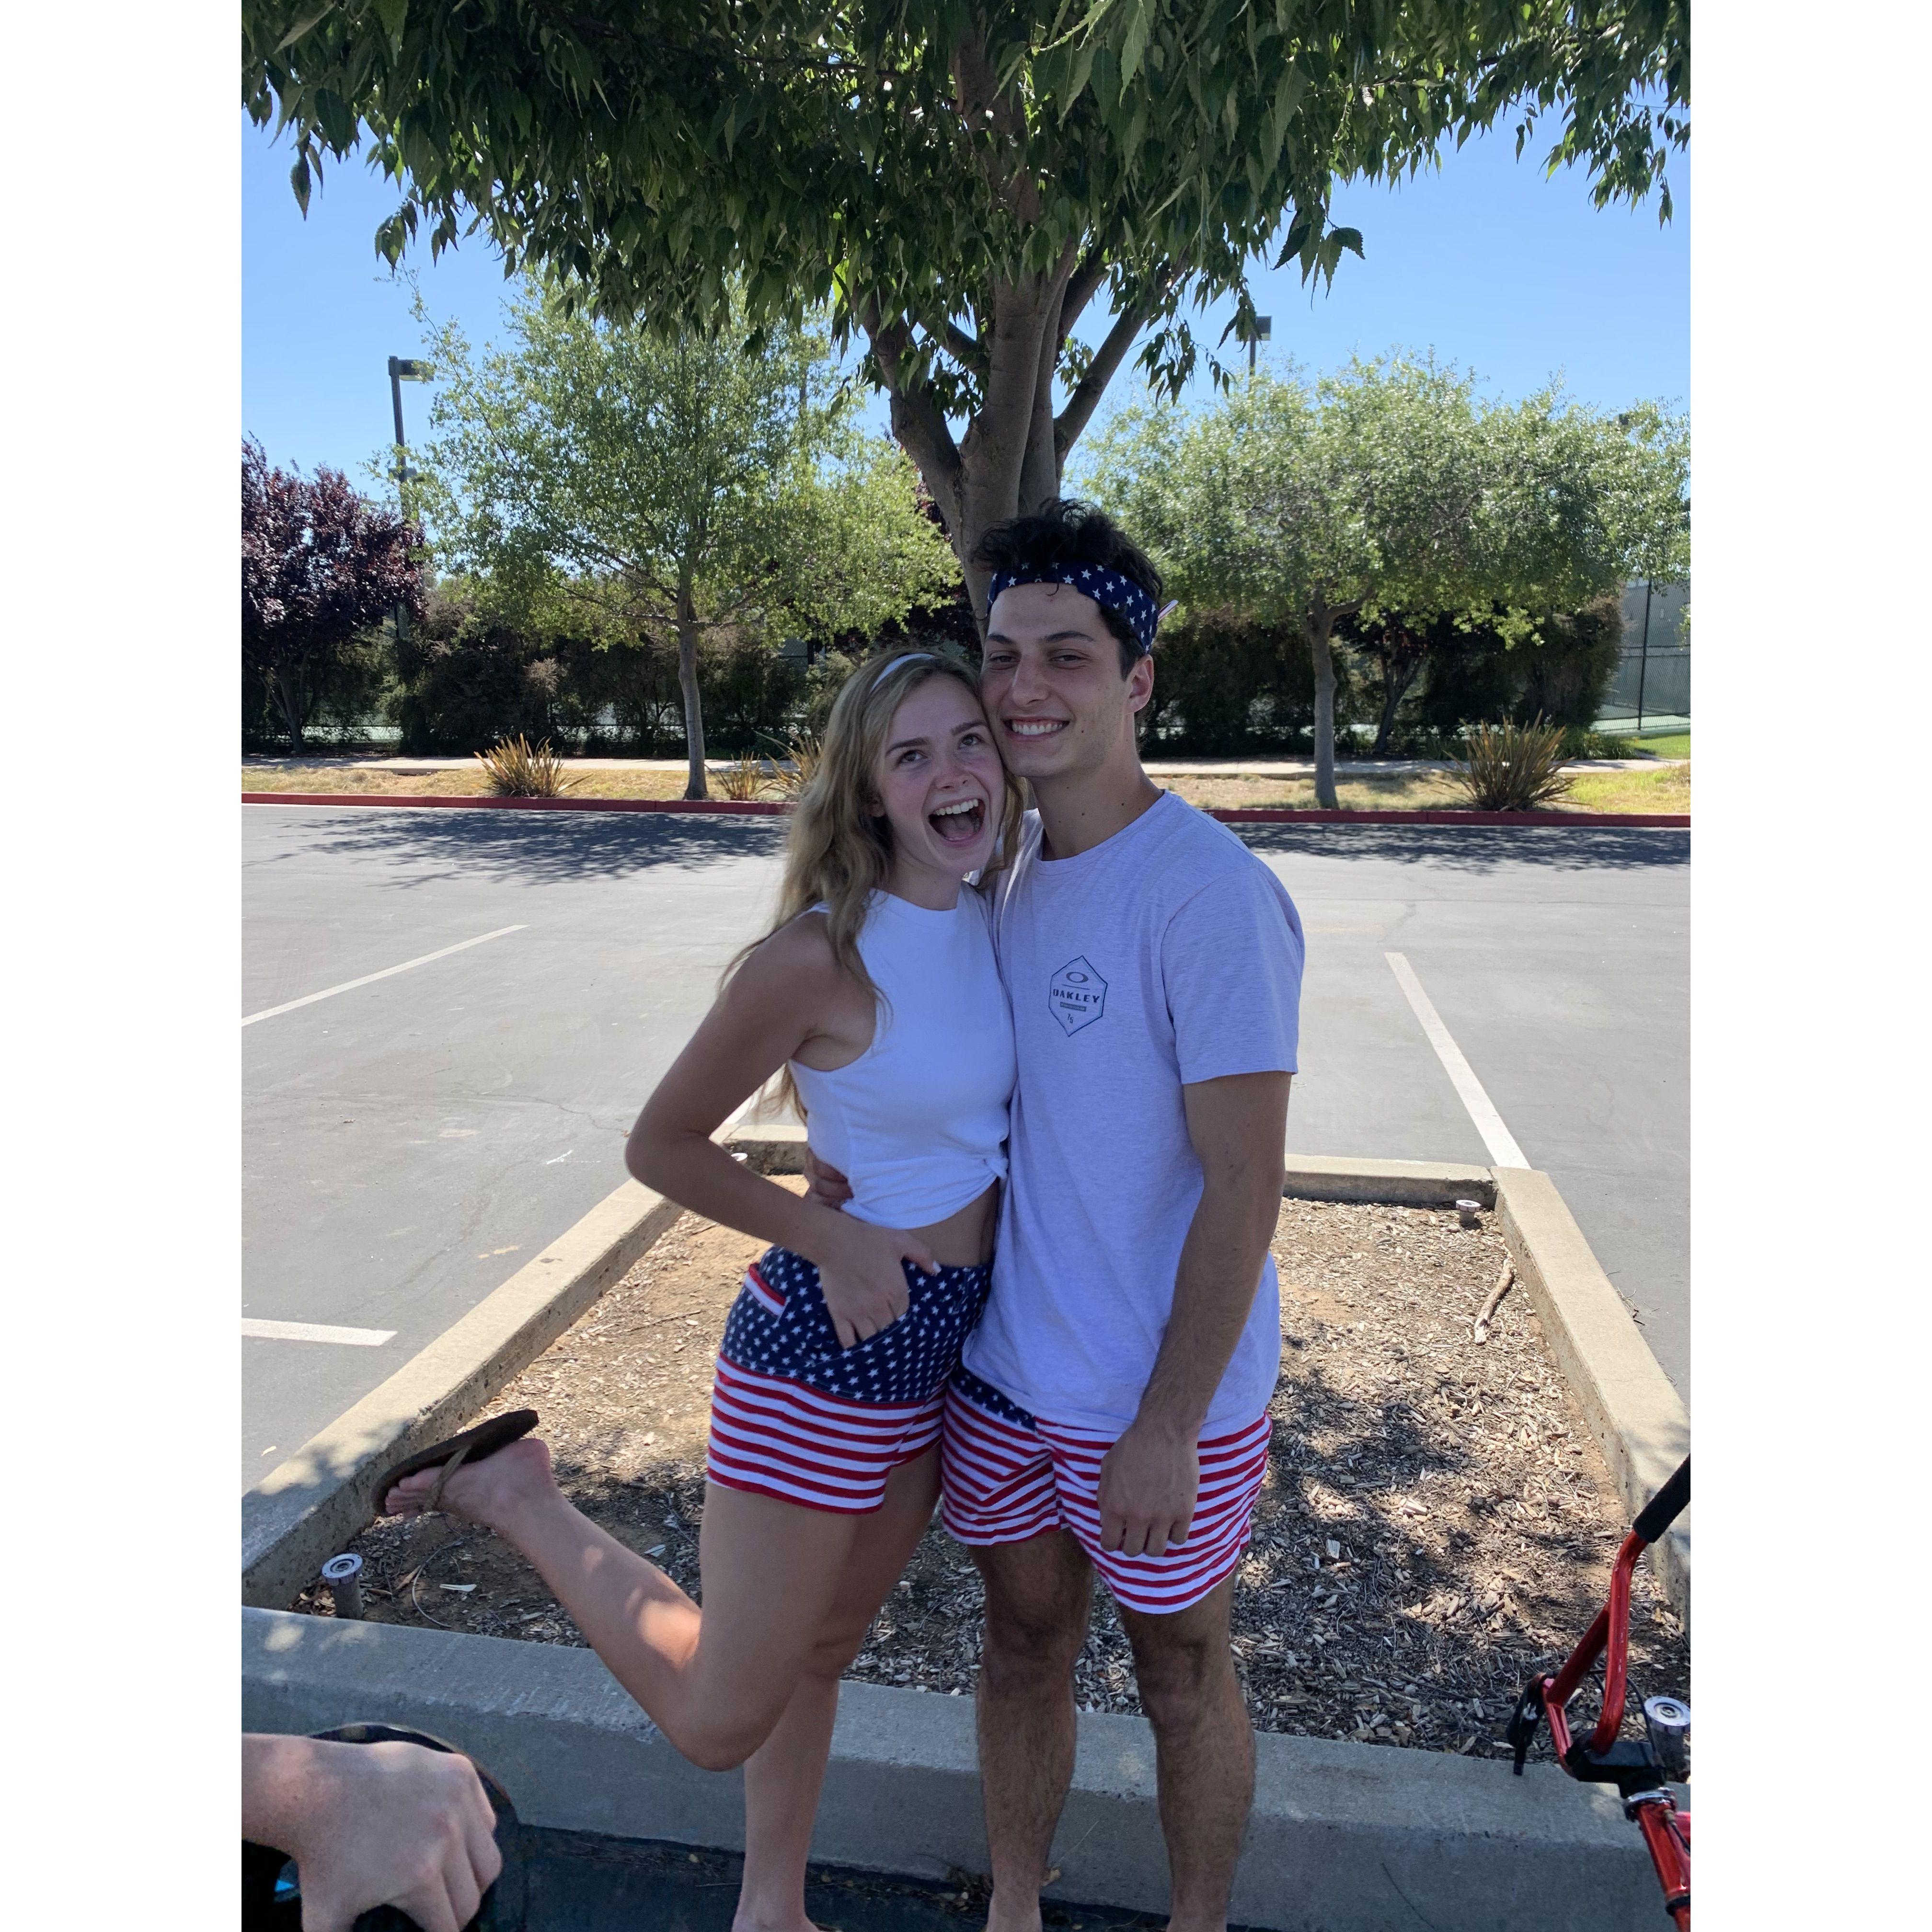 We wear our matching chubbie's shorts every 4th of July!